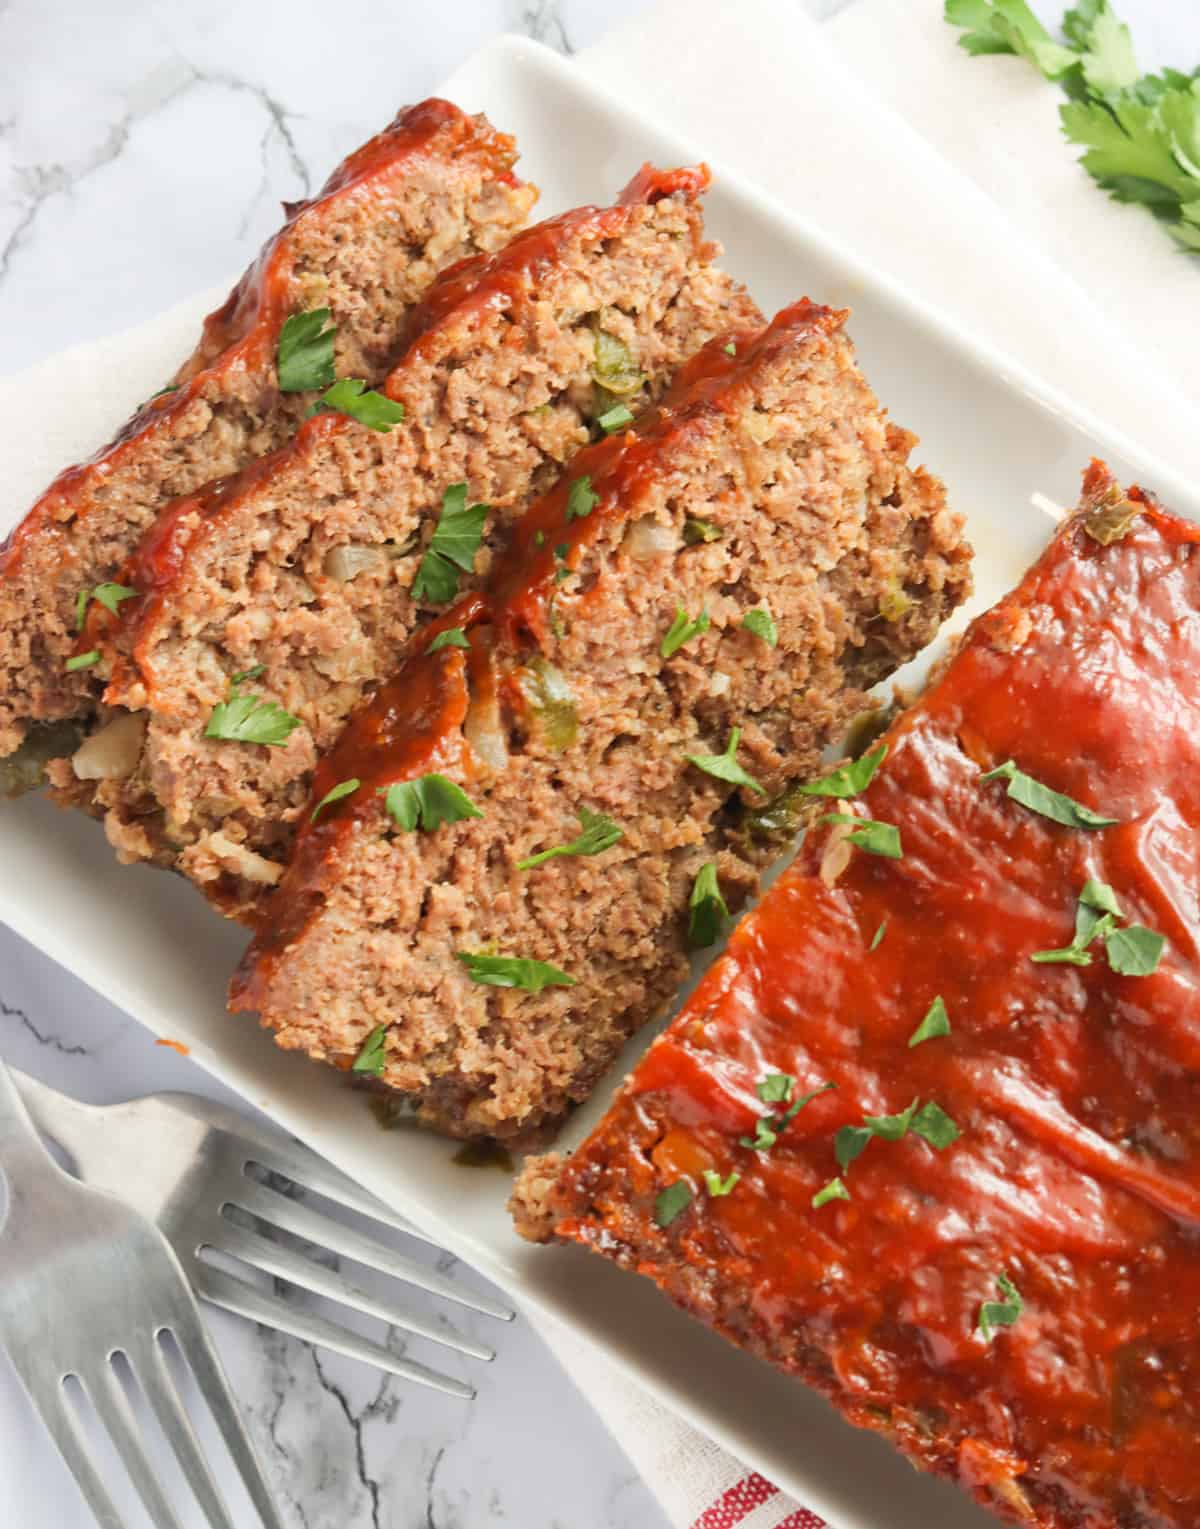 Sliced Southern meatloaf ready to please